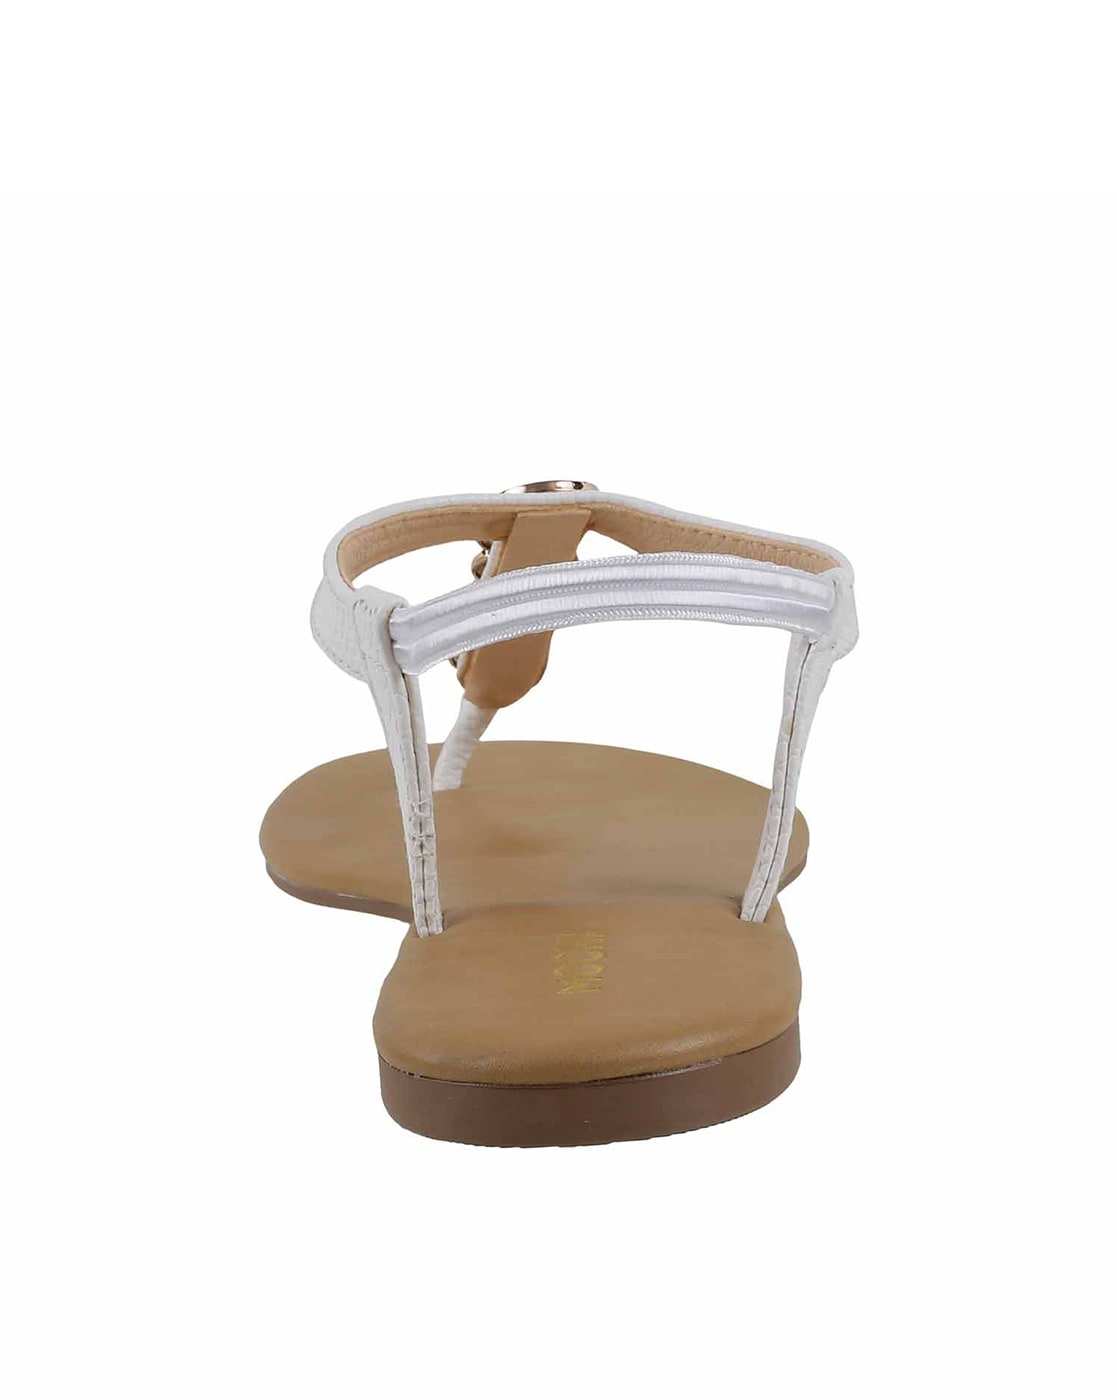 T-Strap Pearls Wedding Flat Sandals with Satin Ankle Strap,Bridal Flat